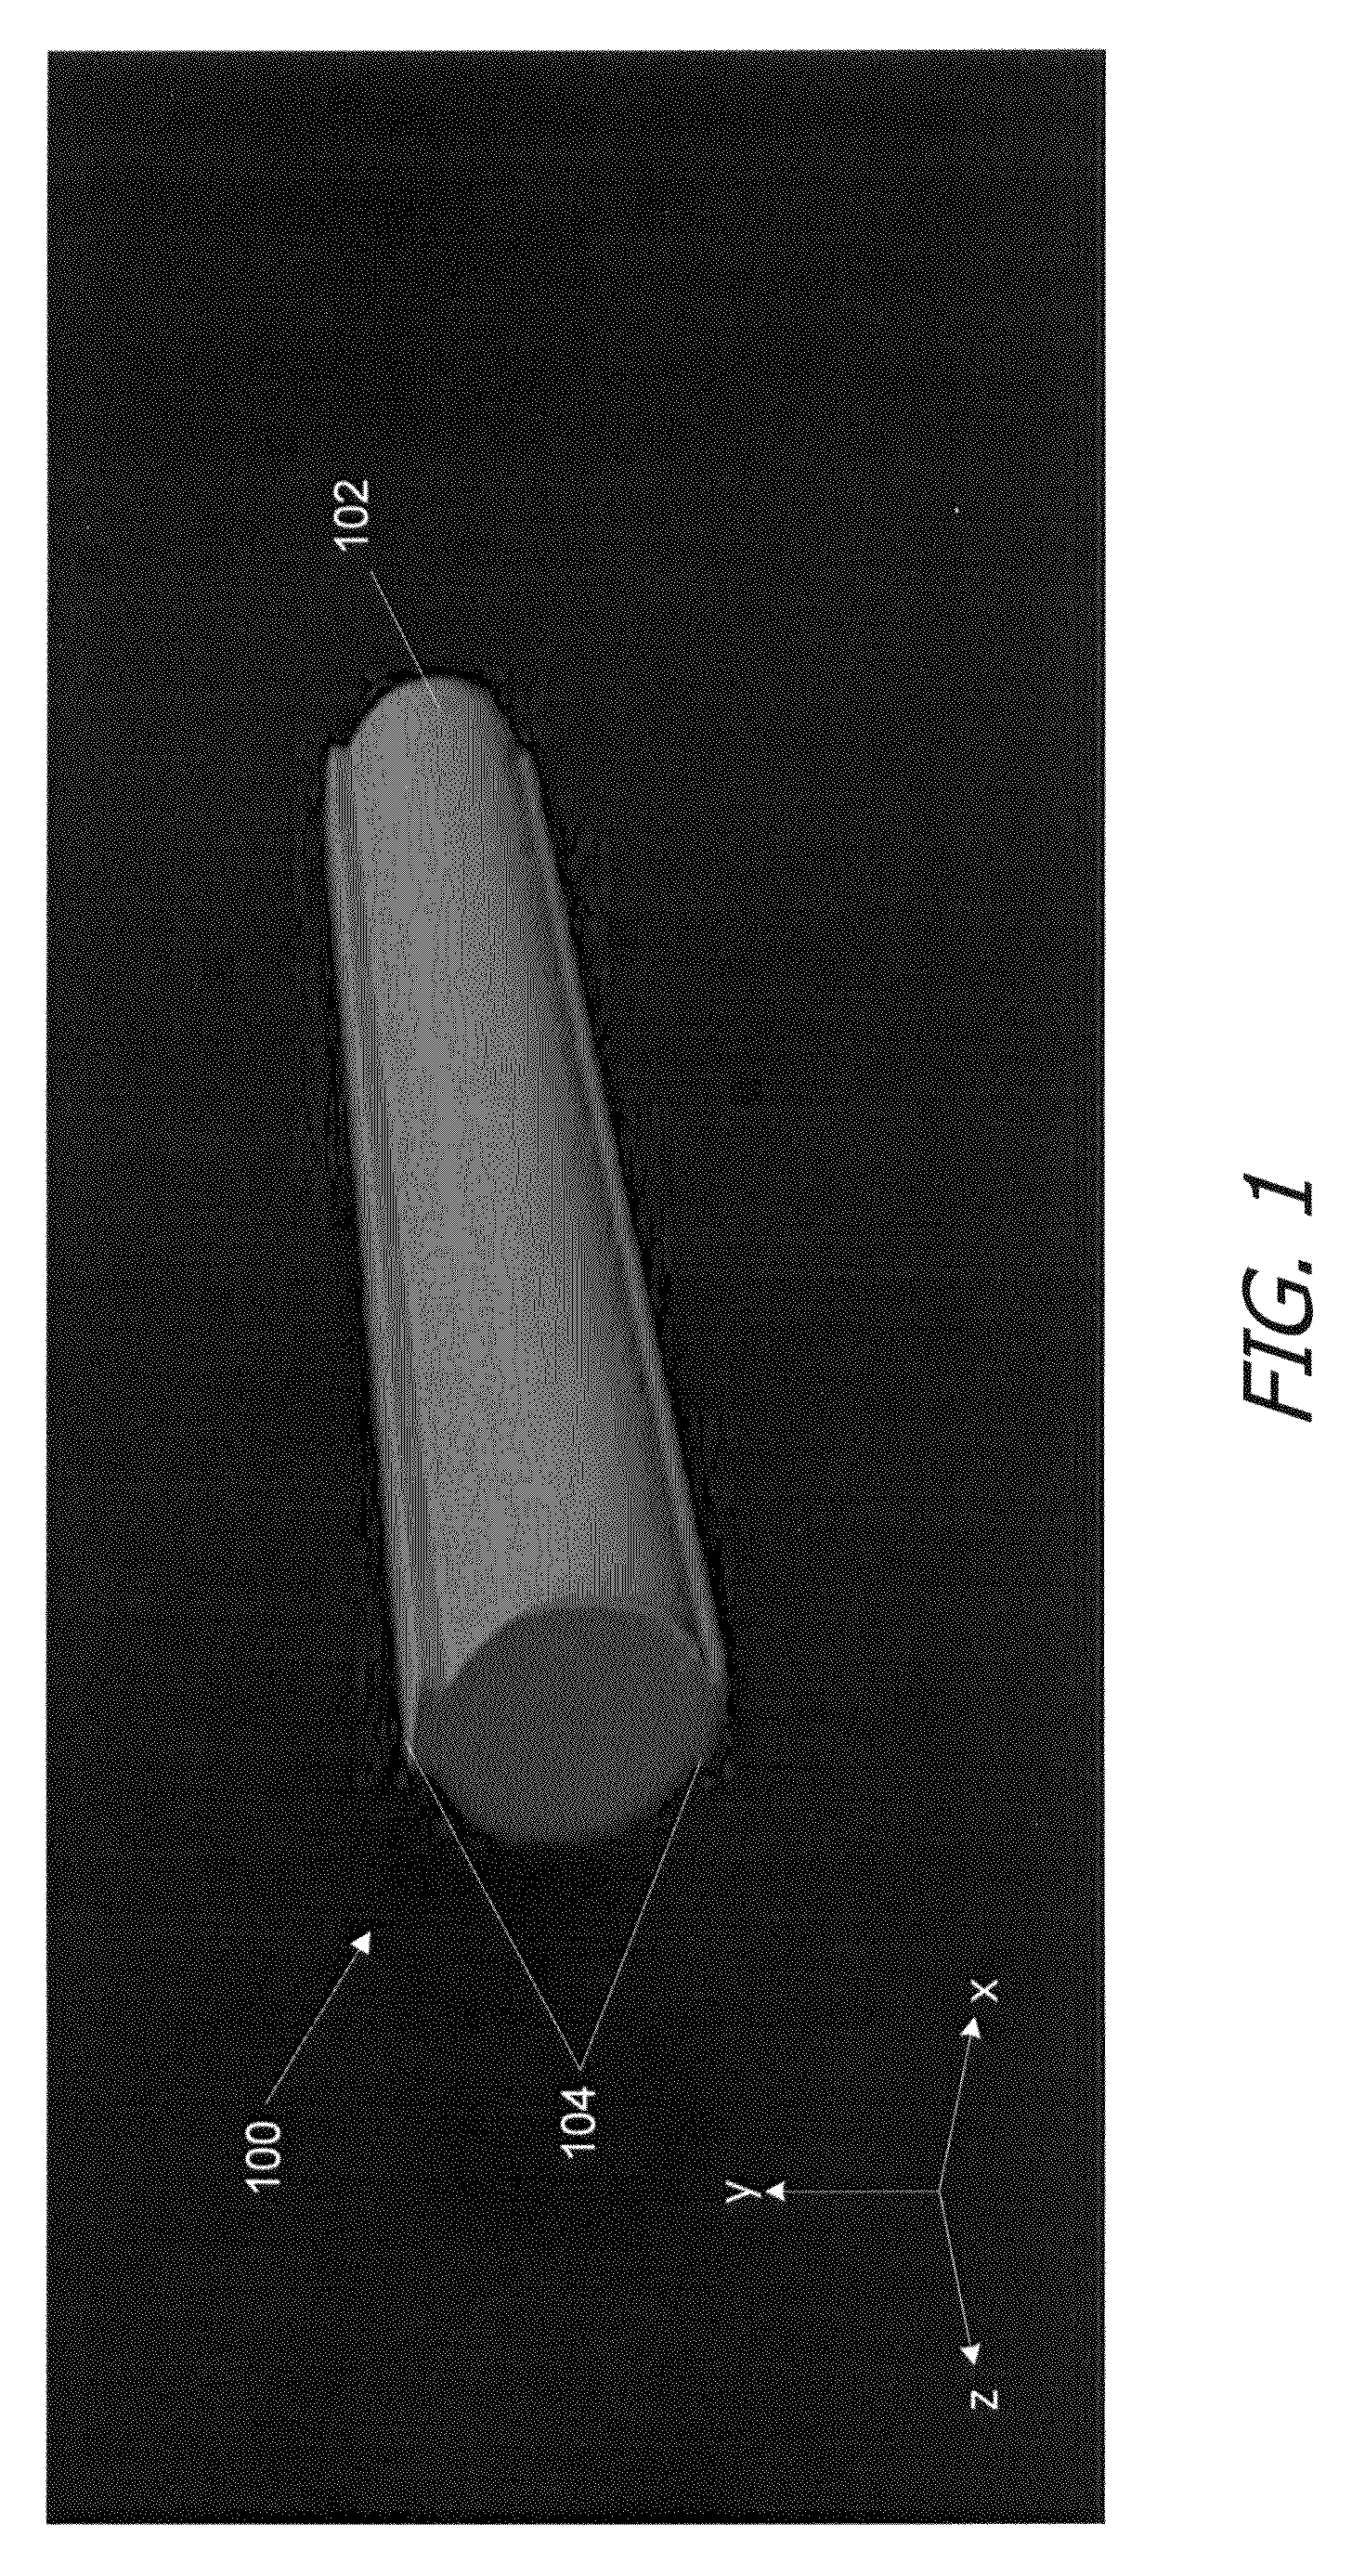 Method and apparatus for graphically defining surface normal maps